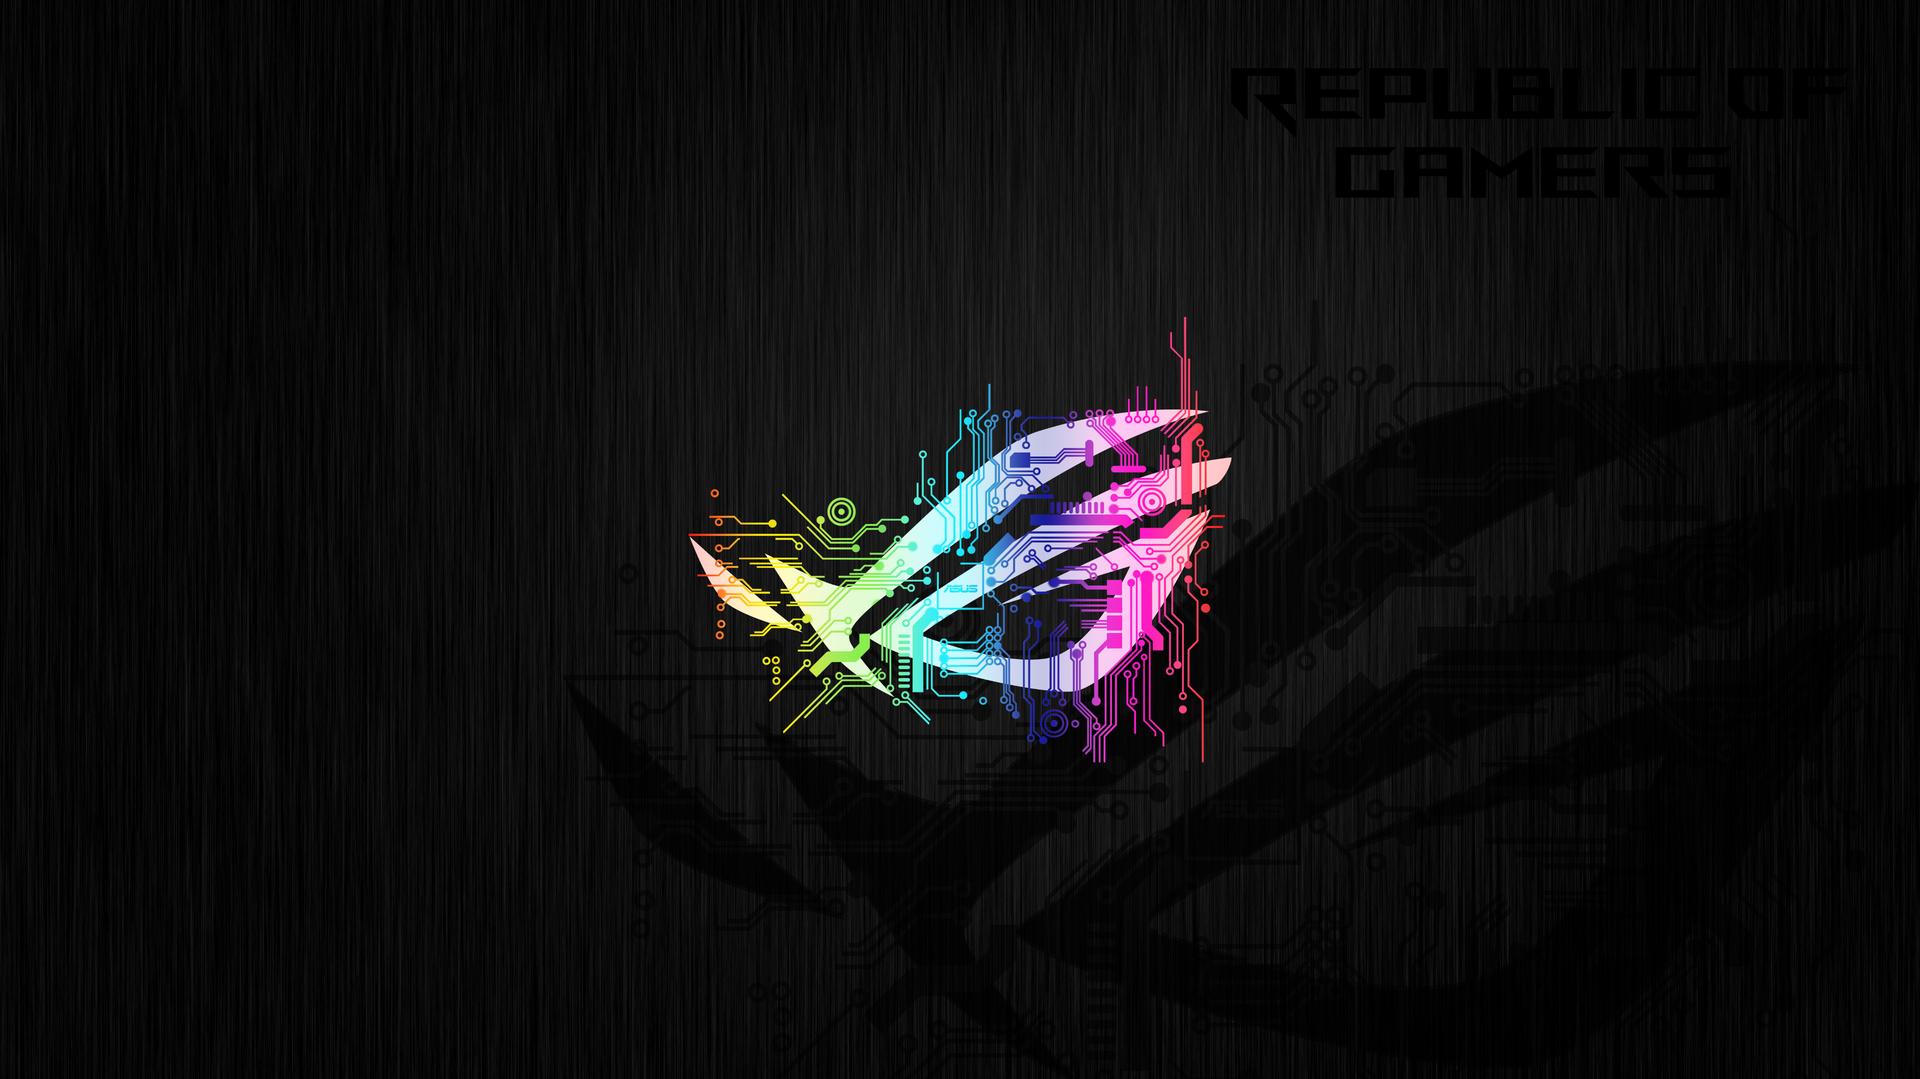 Republic Of Gamers Abstract Logo 4k Laptop Full HD 1080p